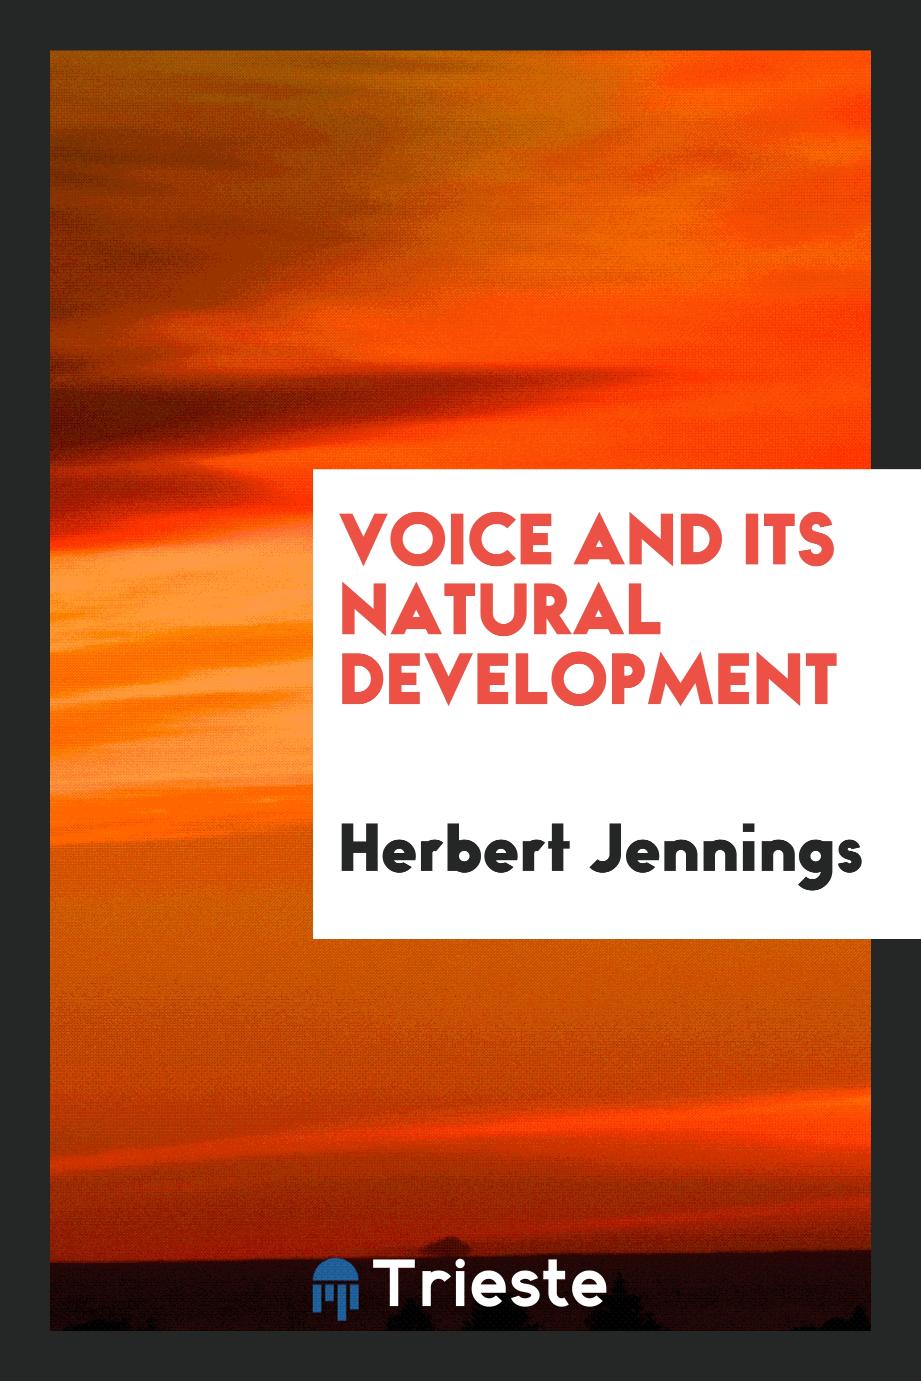 Voice and its natural development